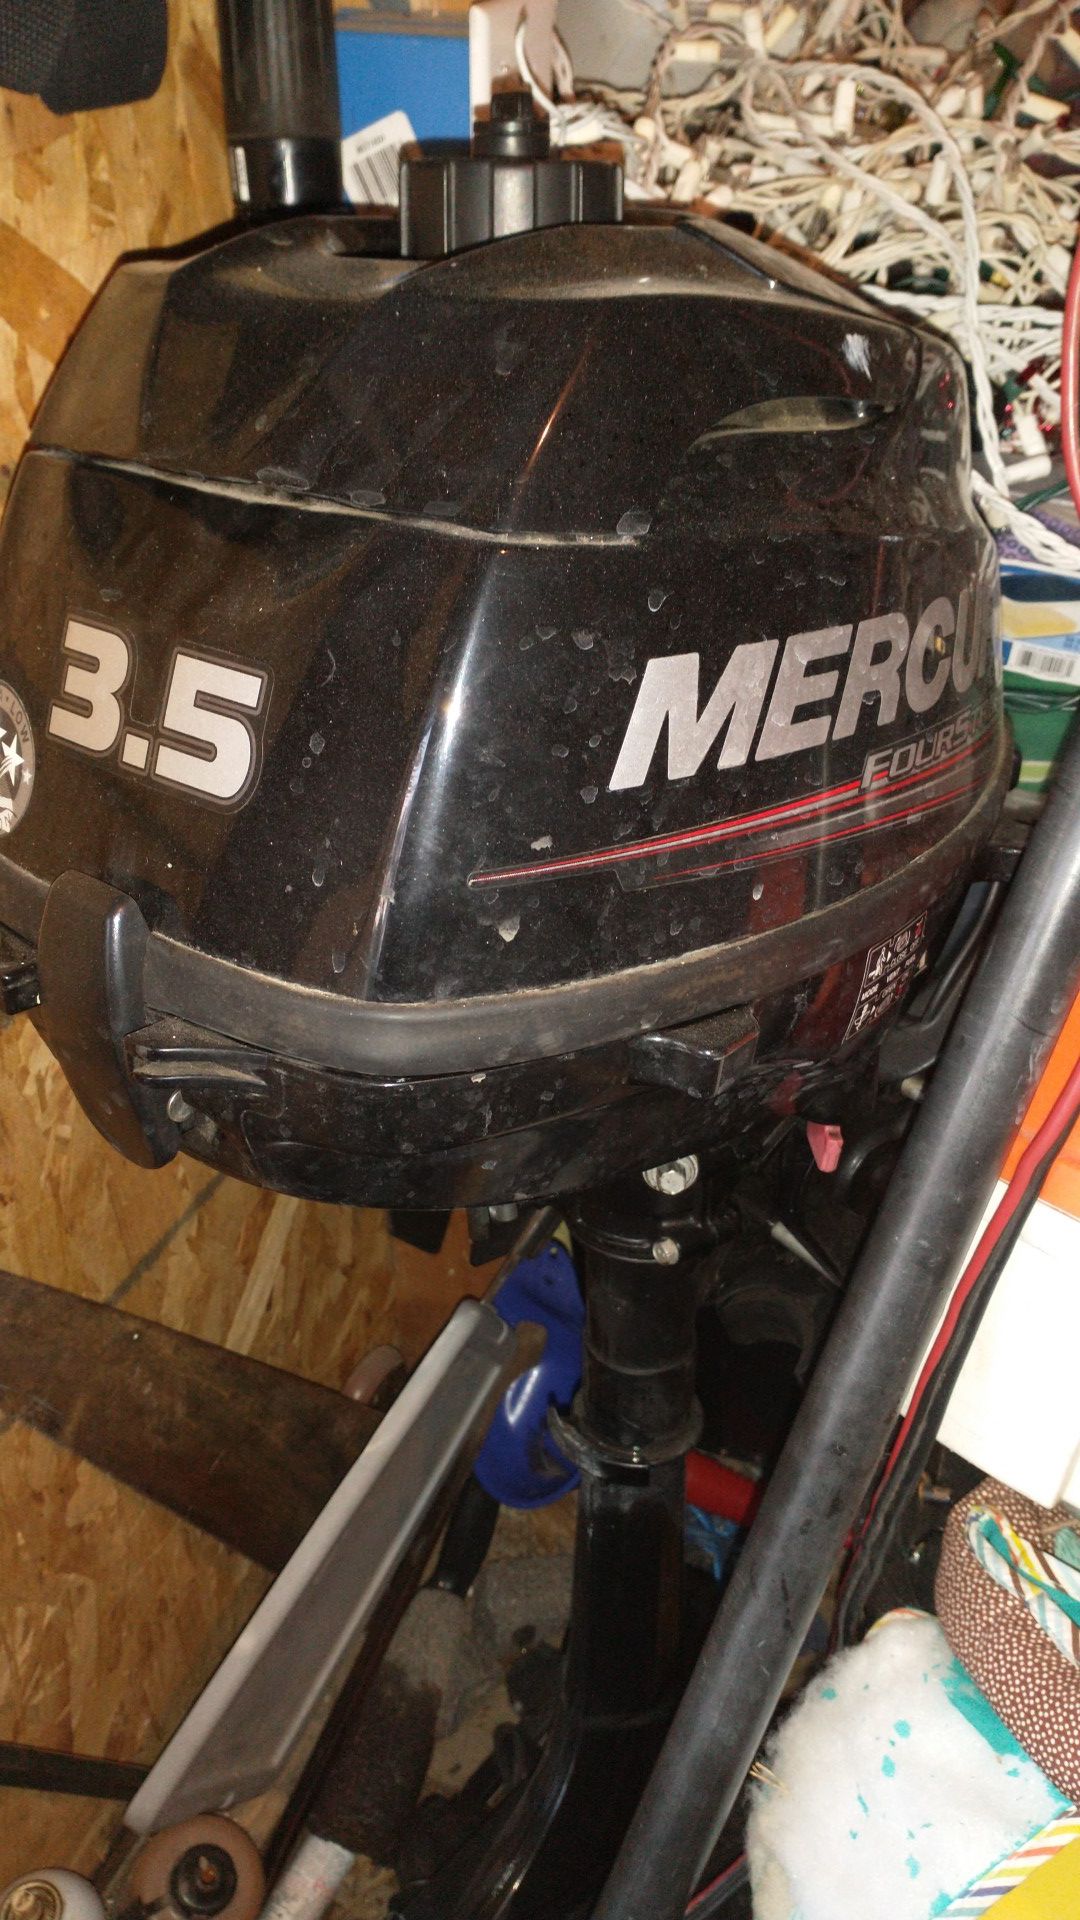 2017 3.5 mercury outboard motor with boat